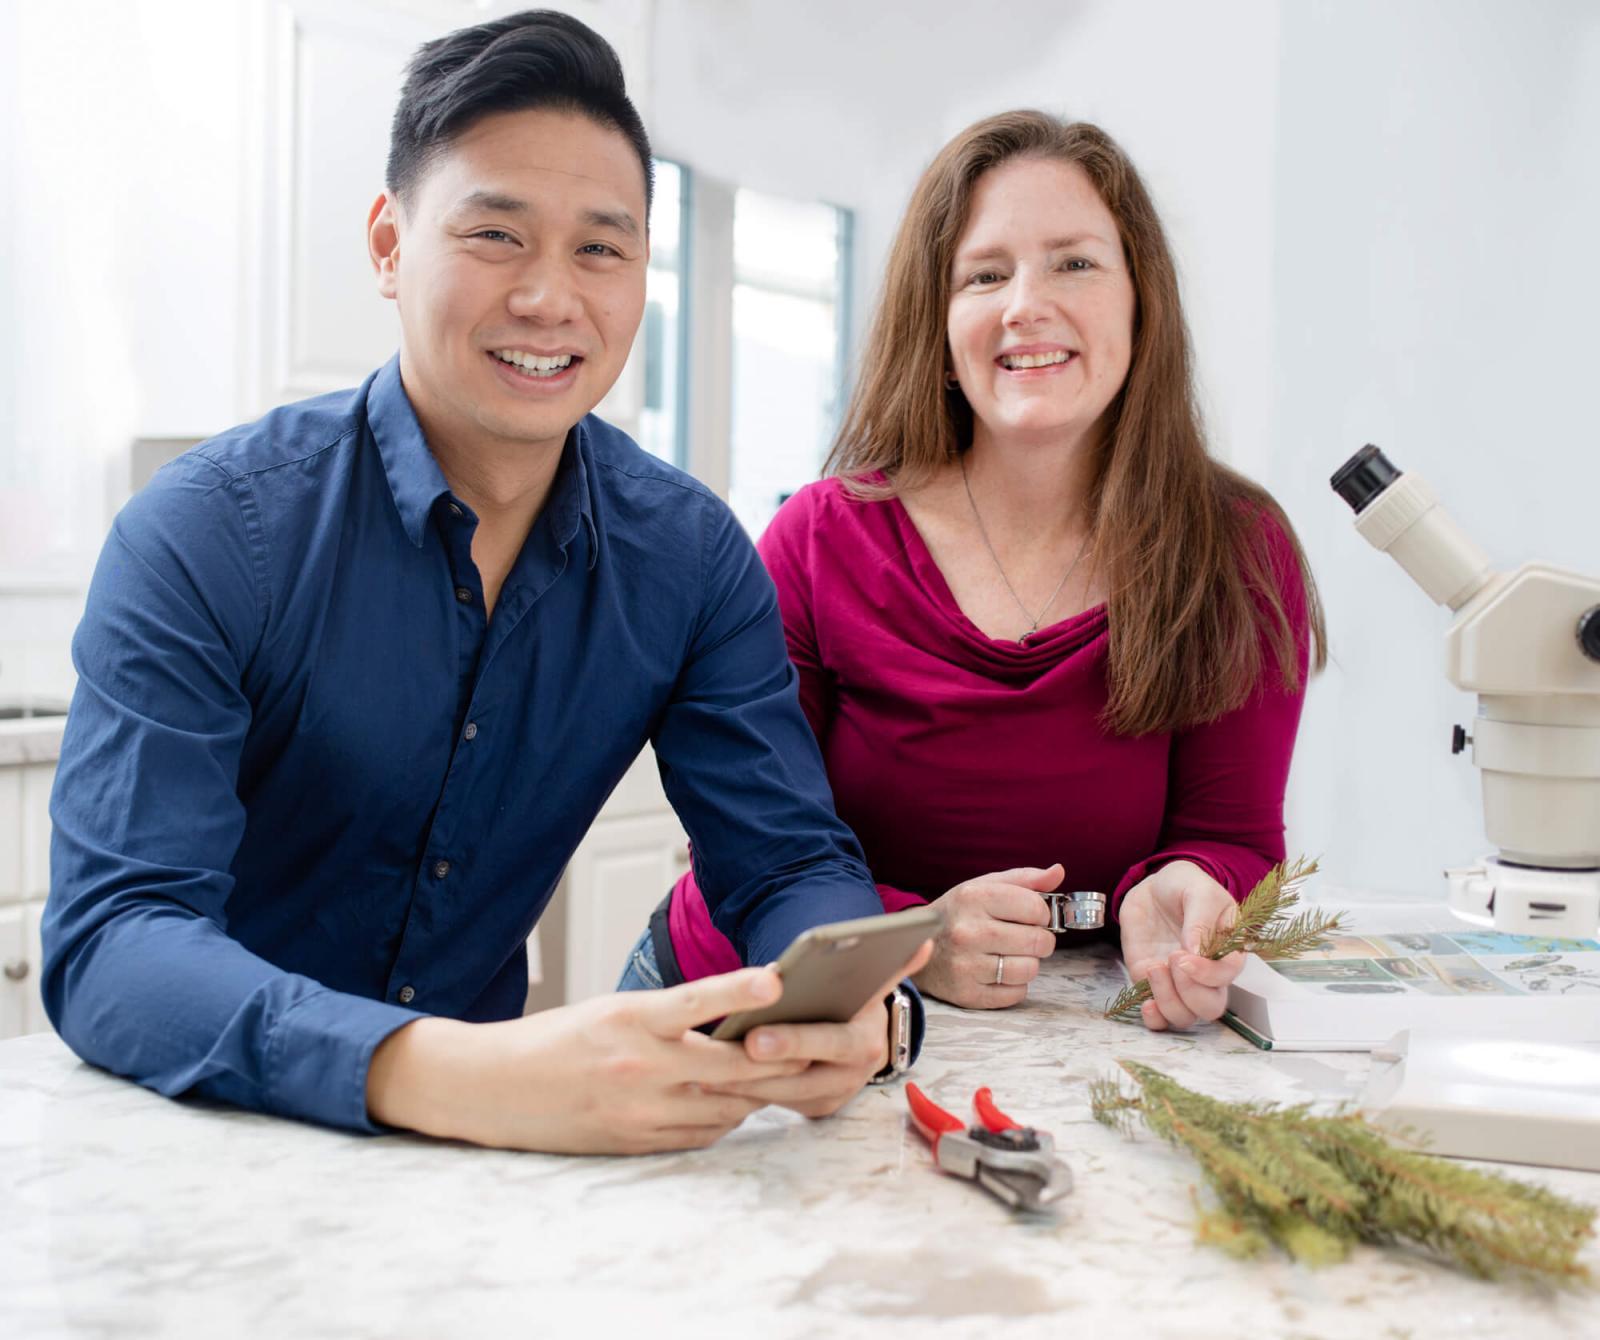 Co-authors Dave Cheung and Jen Llewellyn are very excited about the launch of their new app, BugFinder.